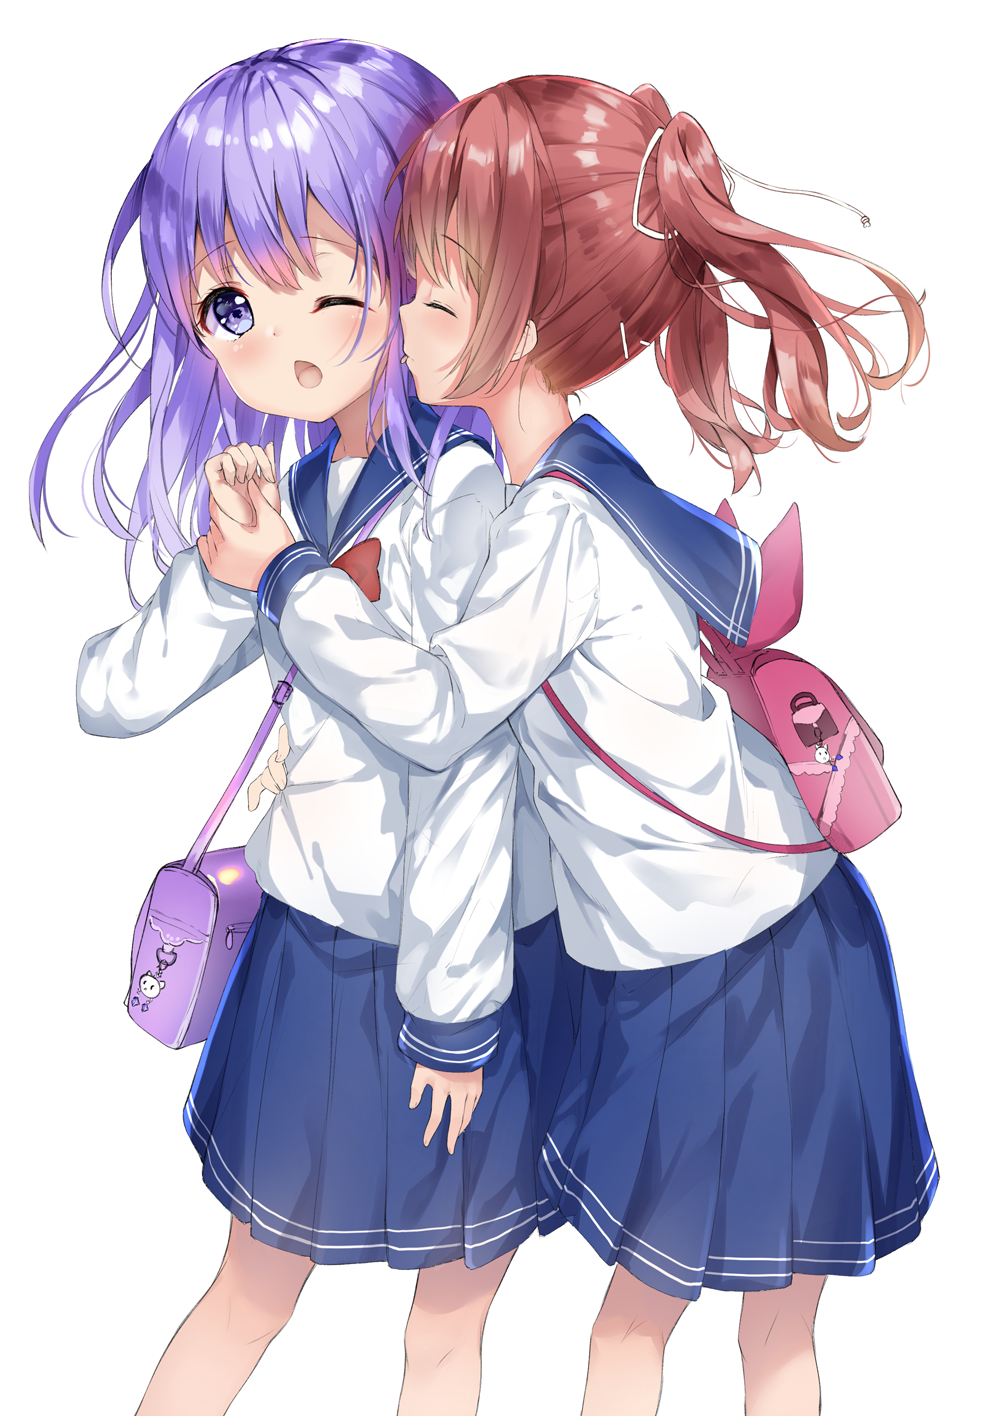 2girls backpack bag bangs blue_sailor_collar blue_skirt bow bowtie brown_hair chestnut_mouth closed_eyes commentary_request eyebrows_visible_through_hair hair_between_eyes hair_ribbon highres long_hair long_sleeves multiple_girls one_eye_closed open_mouth original pleated_skirt purple_hair red_neckwear ribbon sailor_collar shiraki_shiori shirt shoulder_bag simple_background skirt tongue tongue_out twintails violet_eyes white_background white_ribbon white_shirt wrist_grab yuri